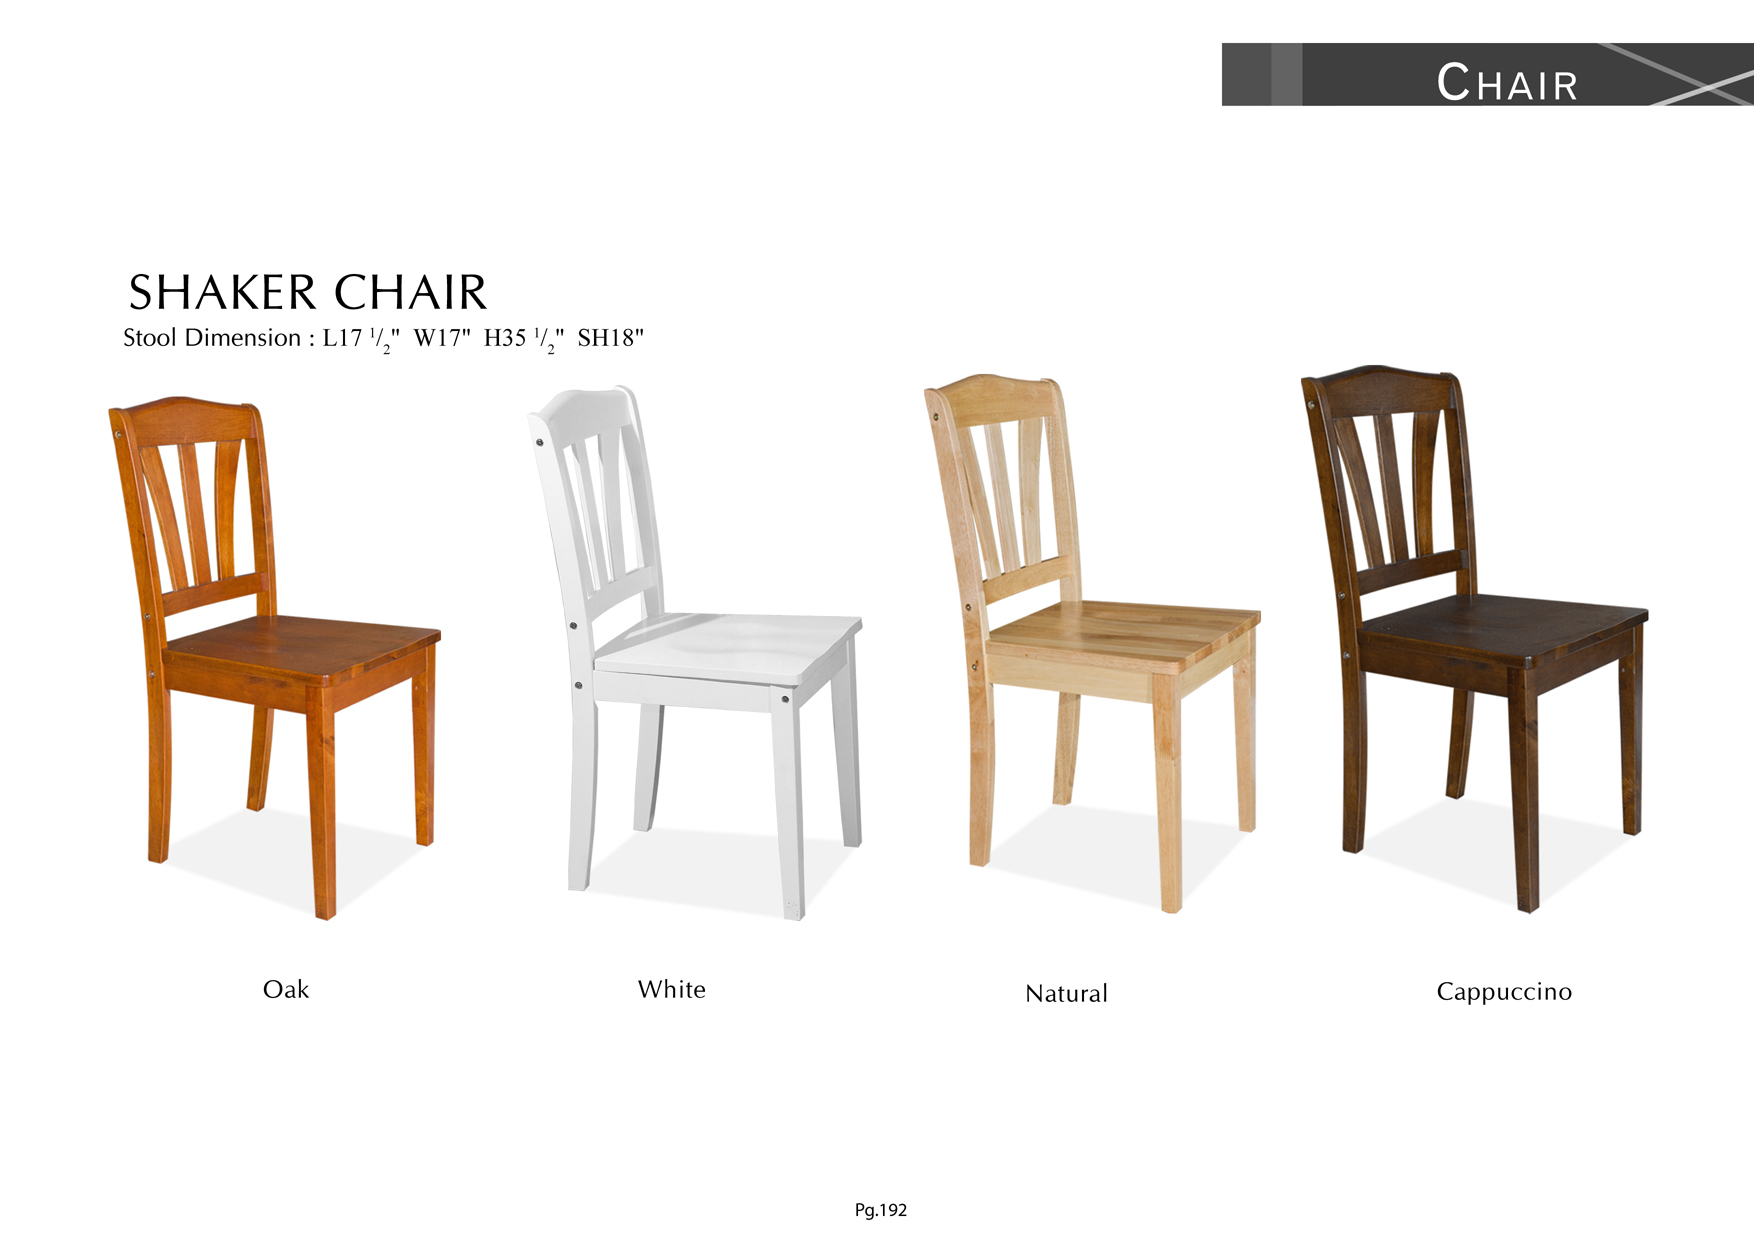 Product: PG192. SHAKER CHAIR